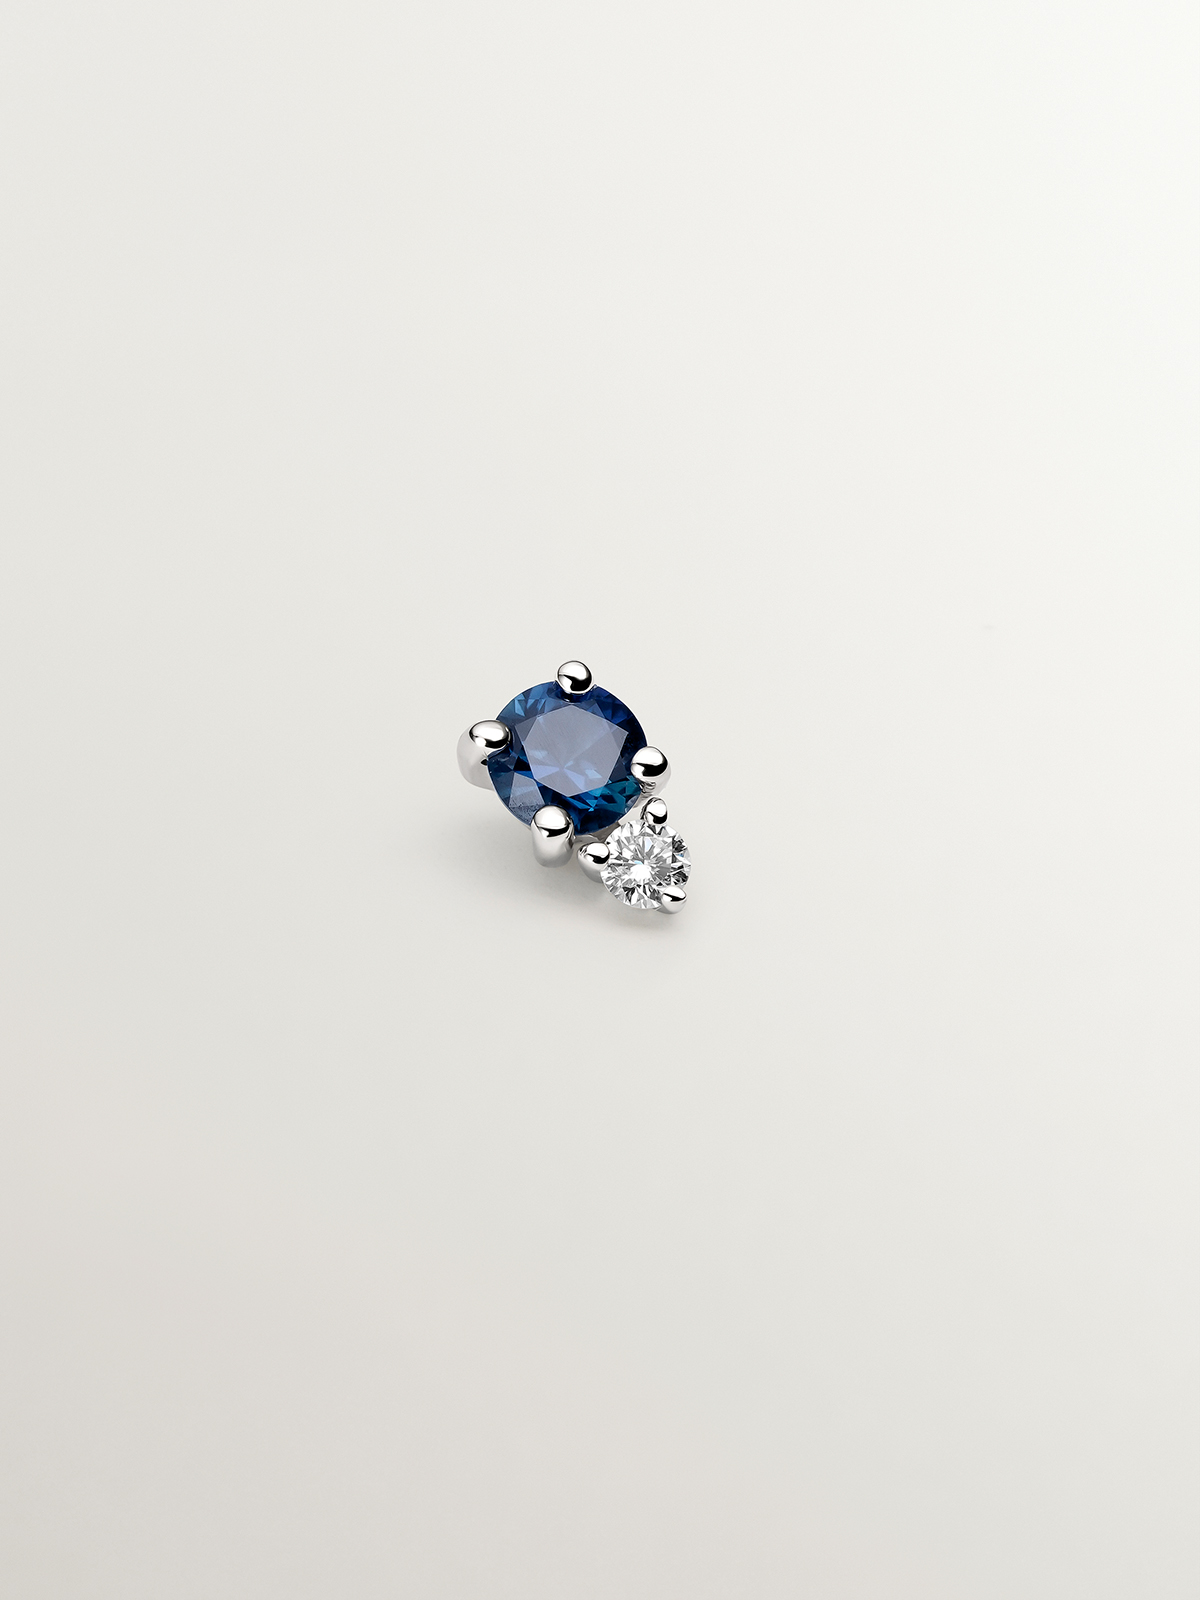 Individual 18K white gold earring with sapphire and diamond.